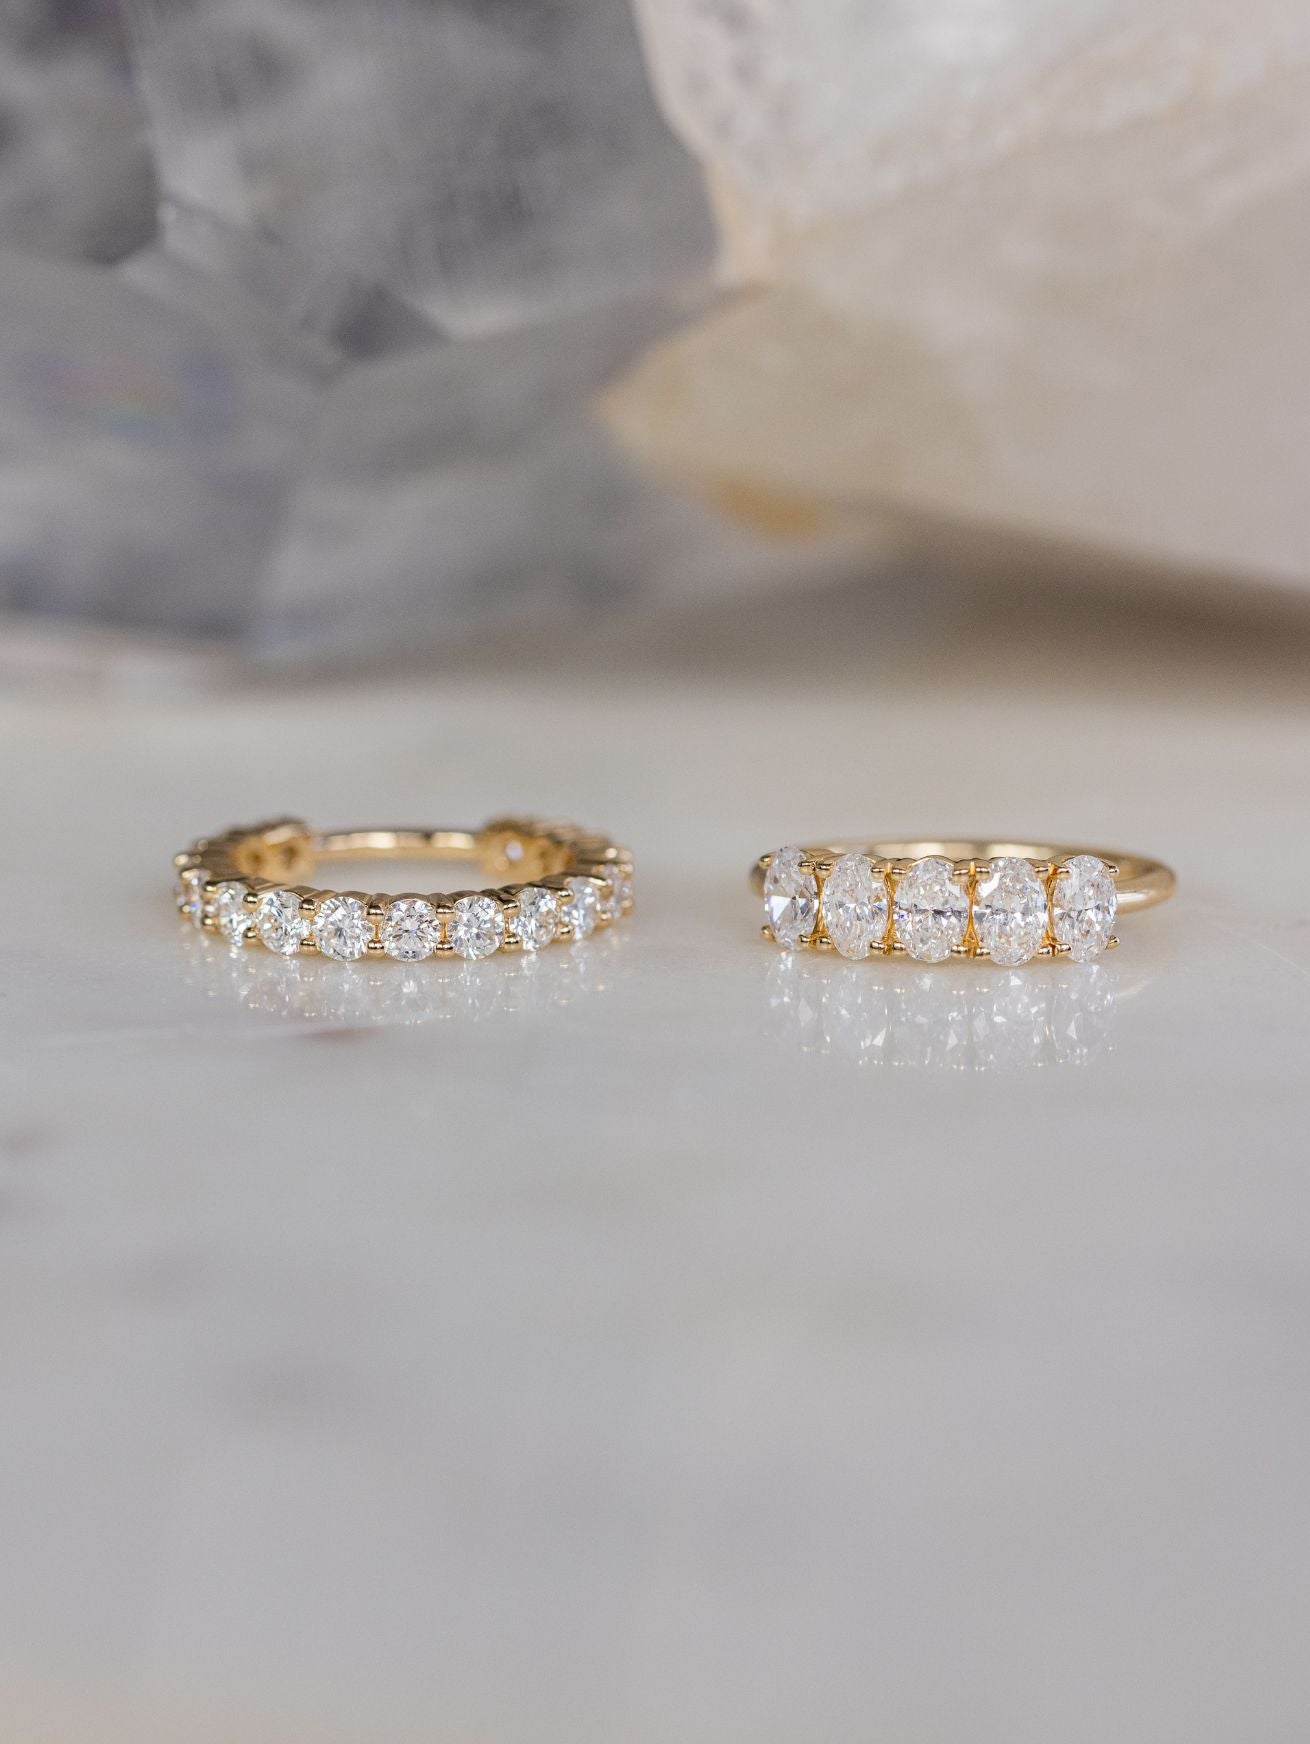 two white diamond bands side by side - Geneva and Olivia.